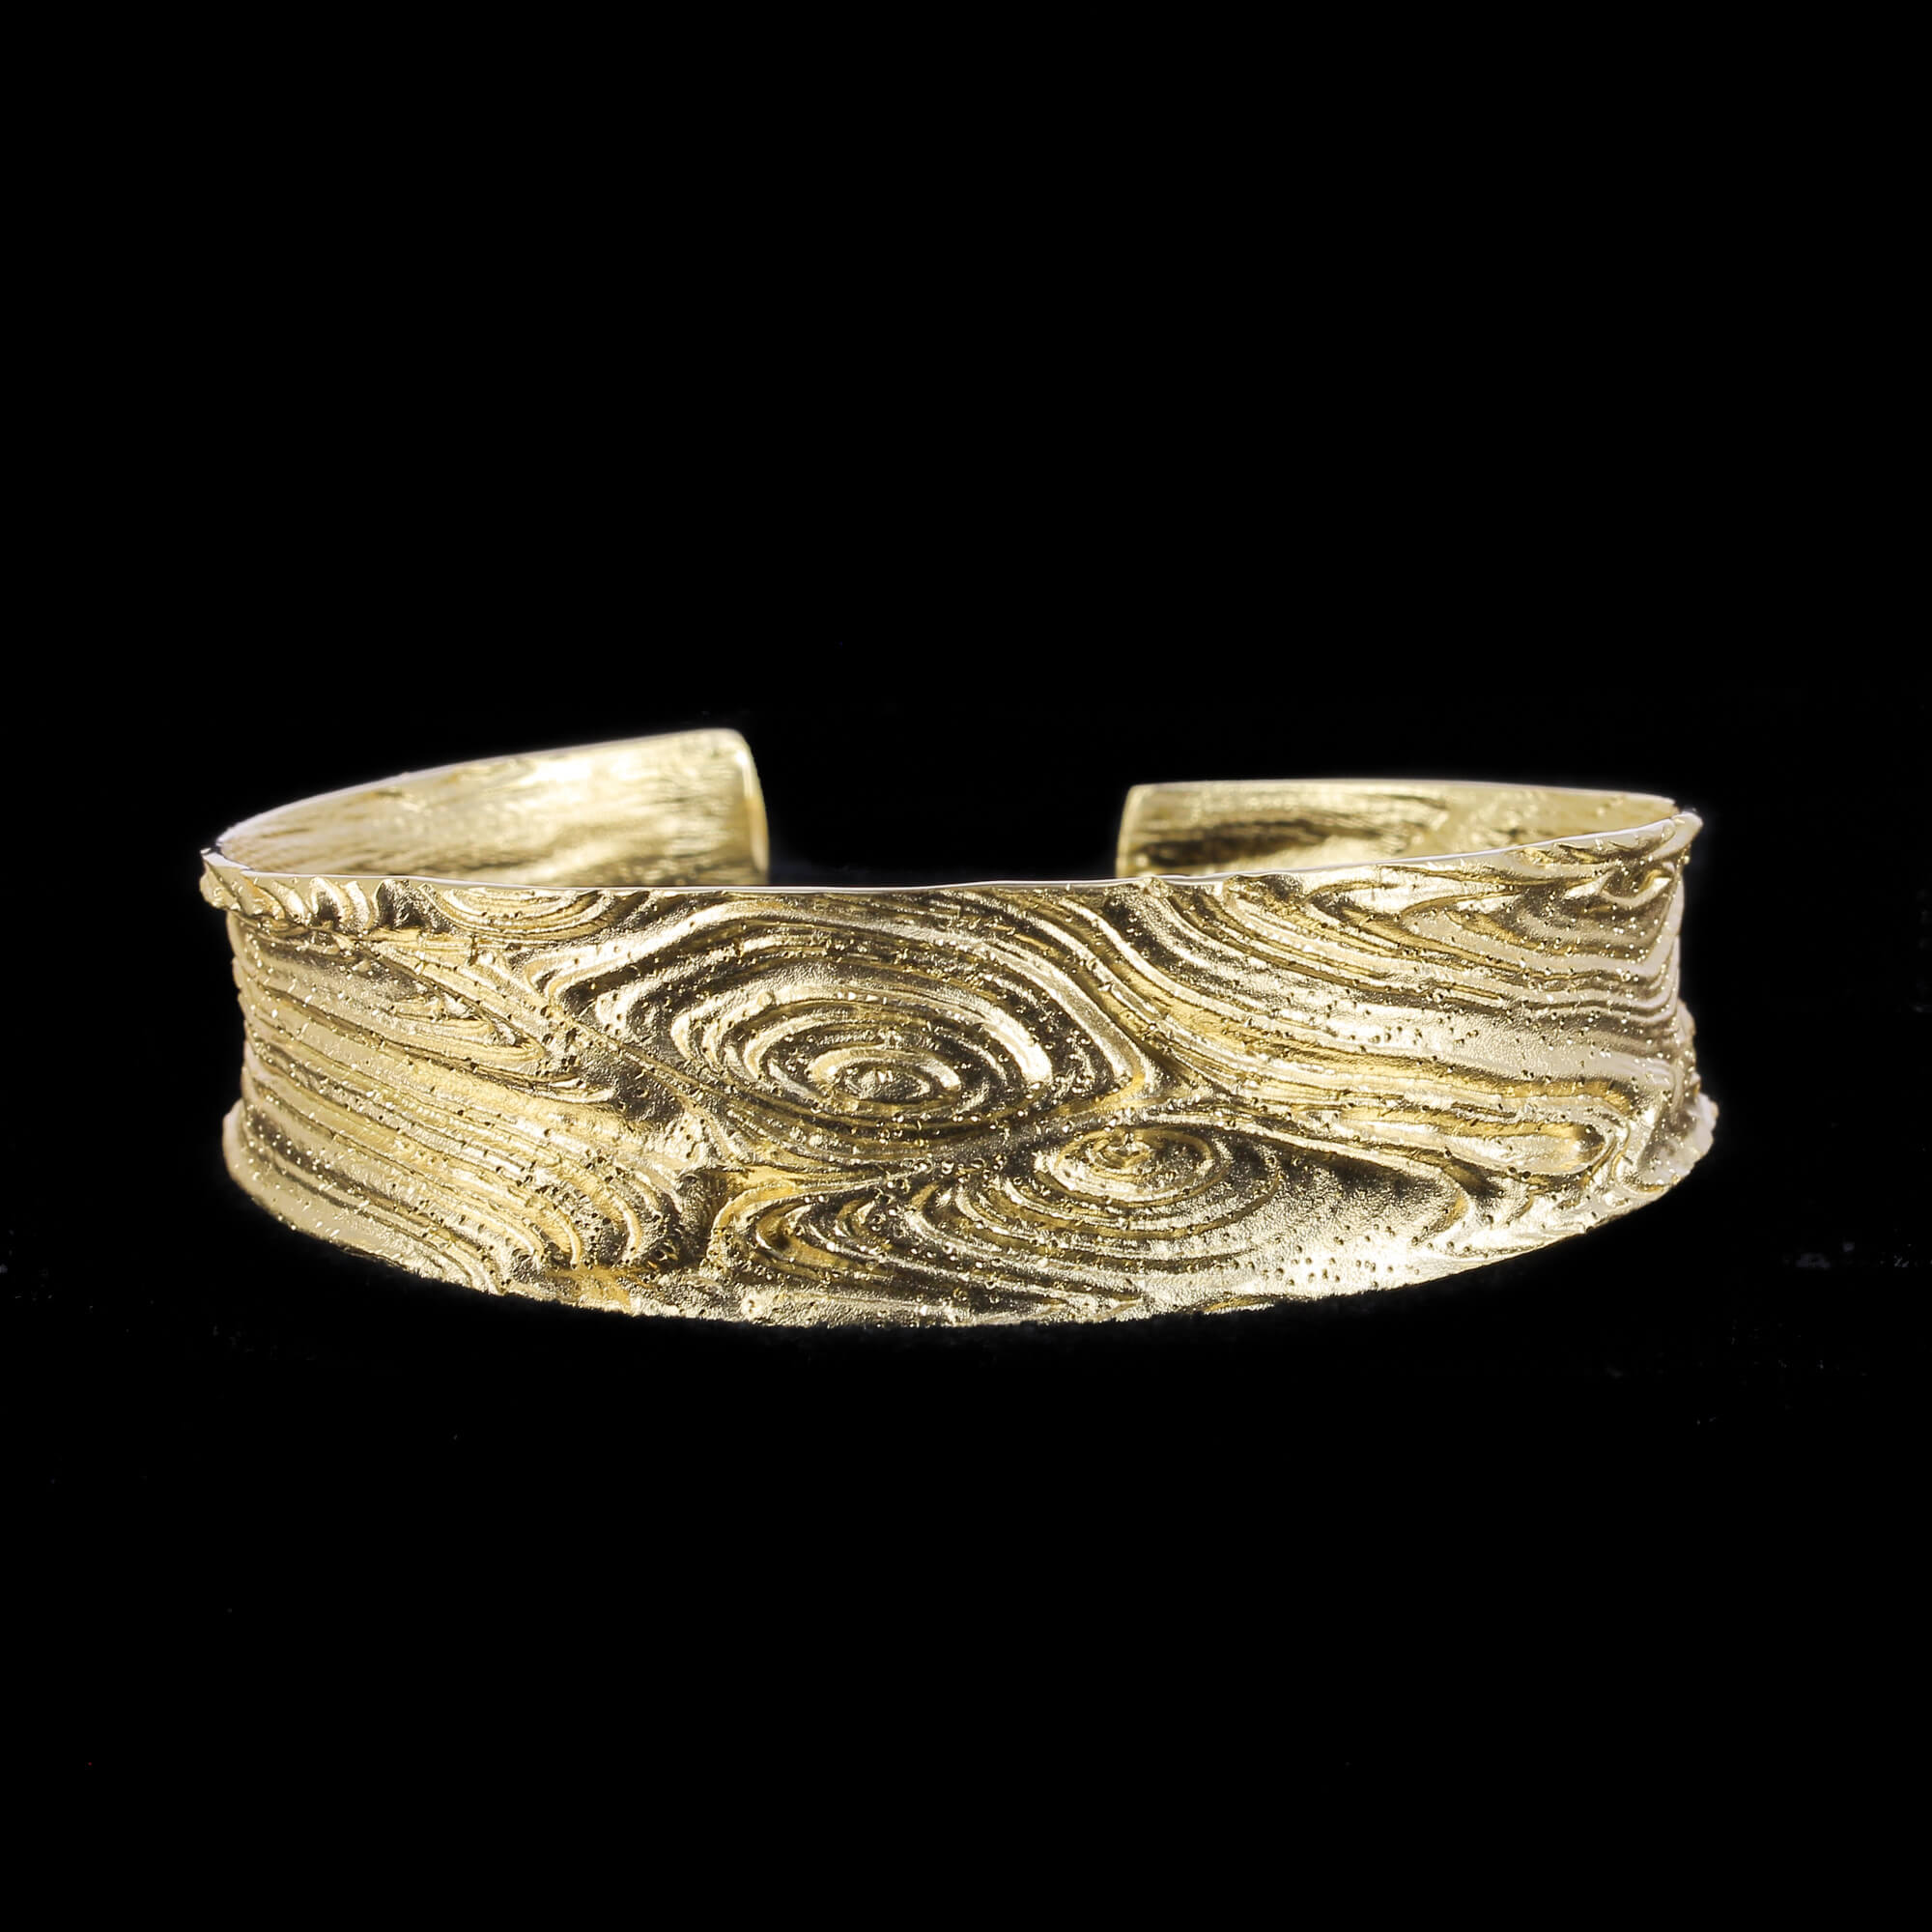 Gold-plated and narrow crafted slave bracelet